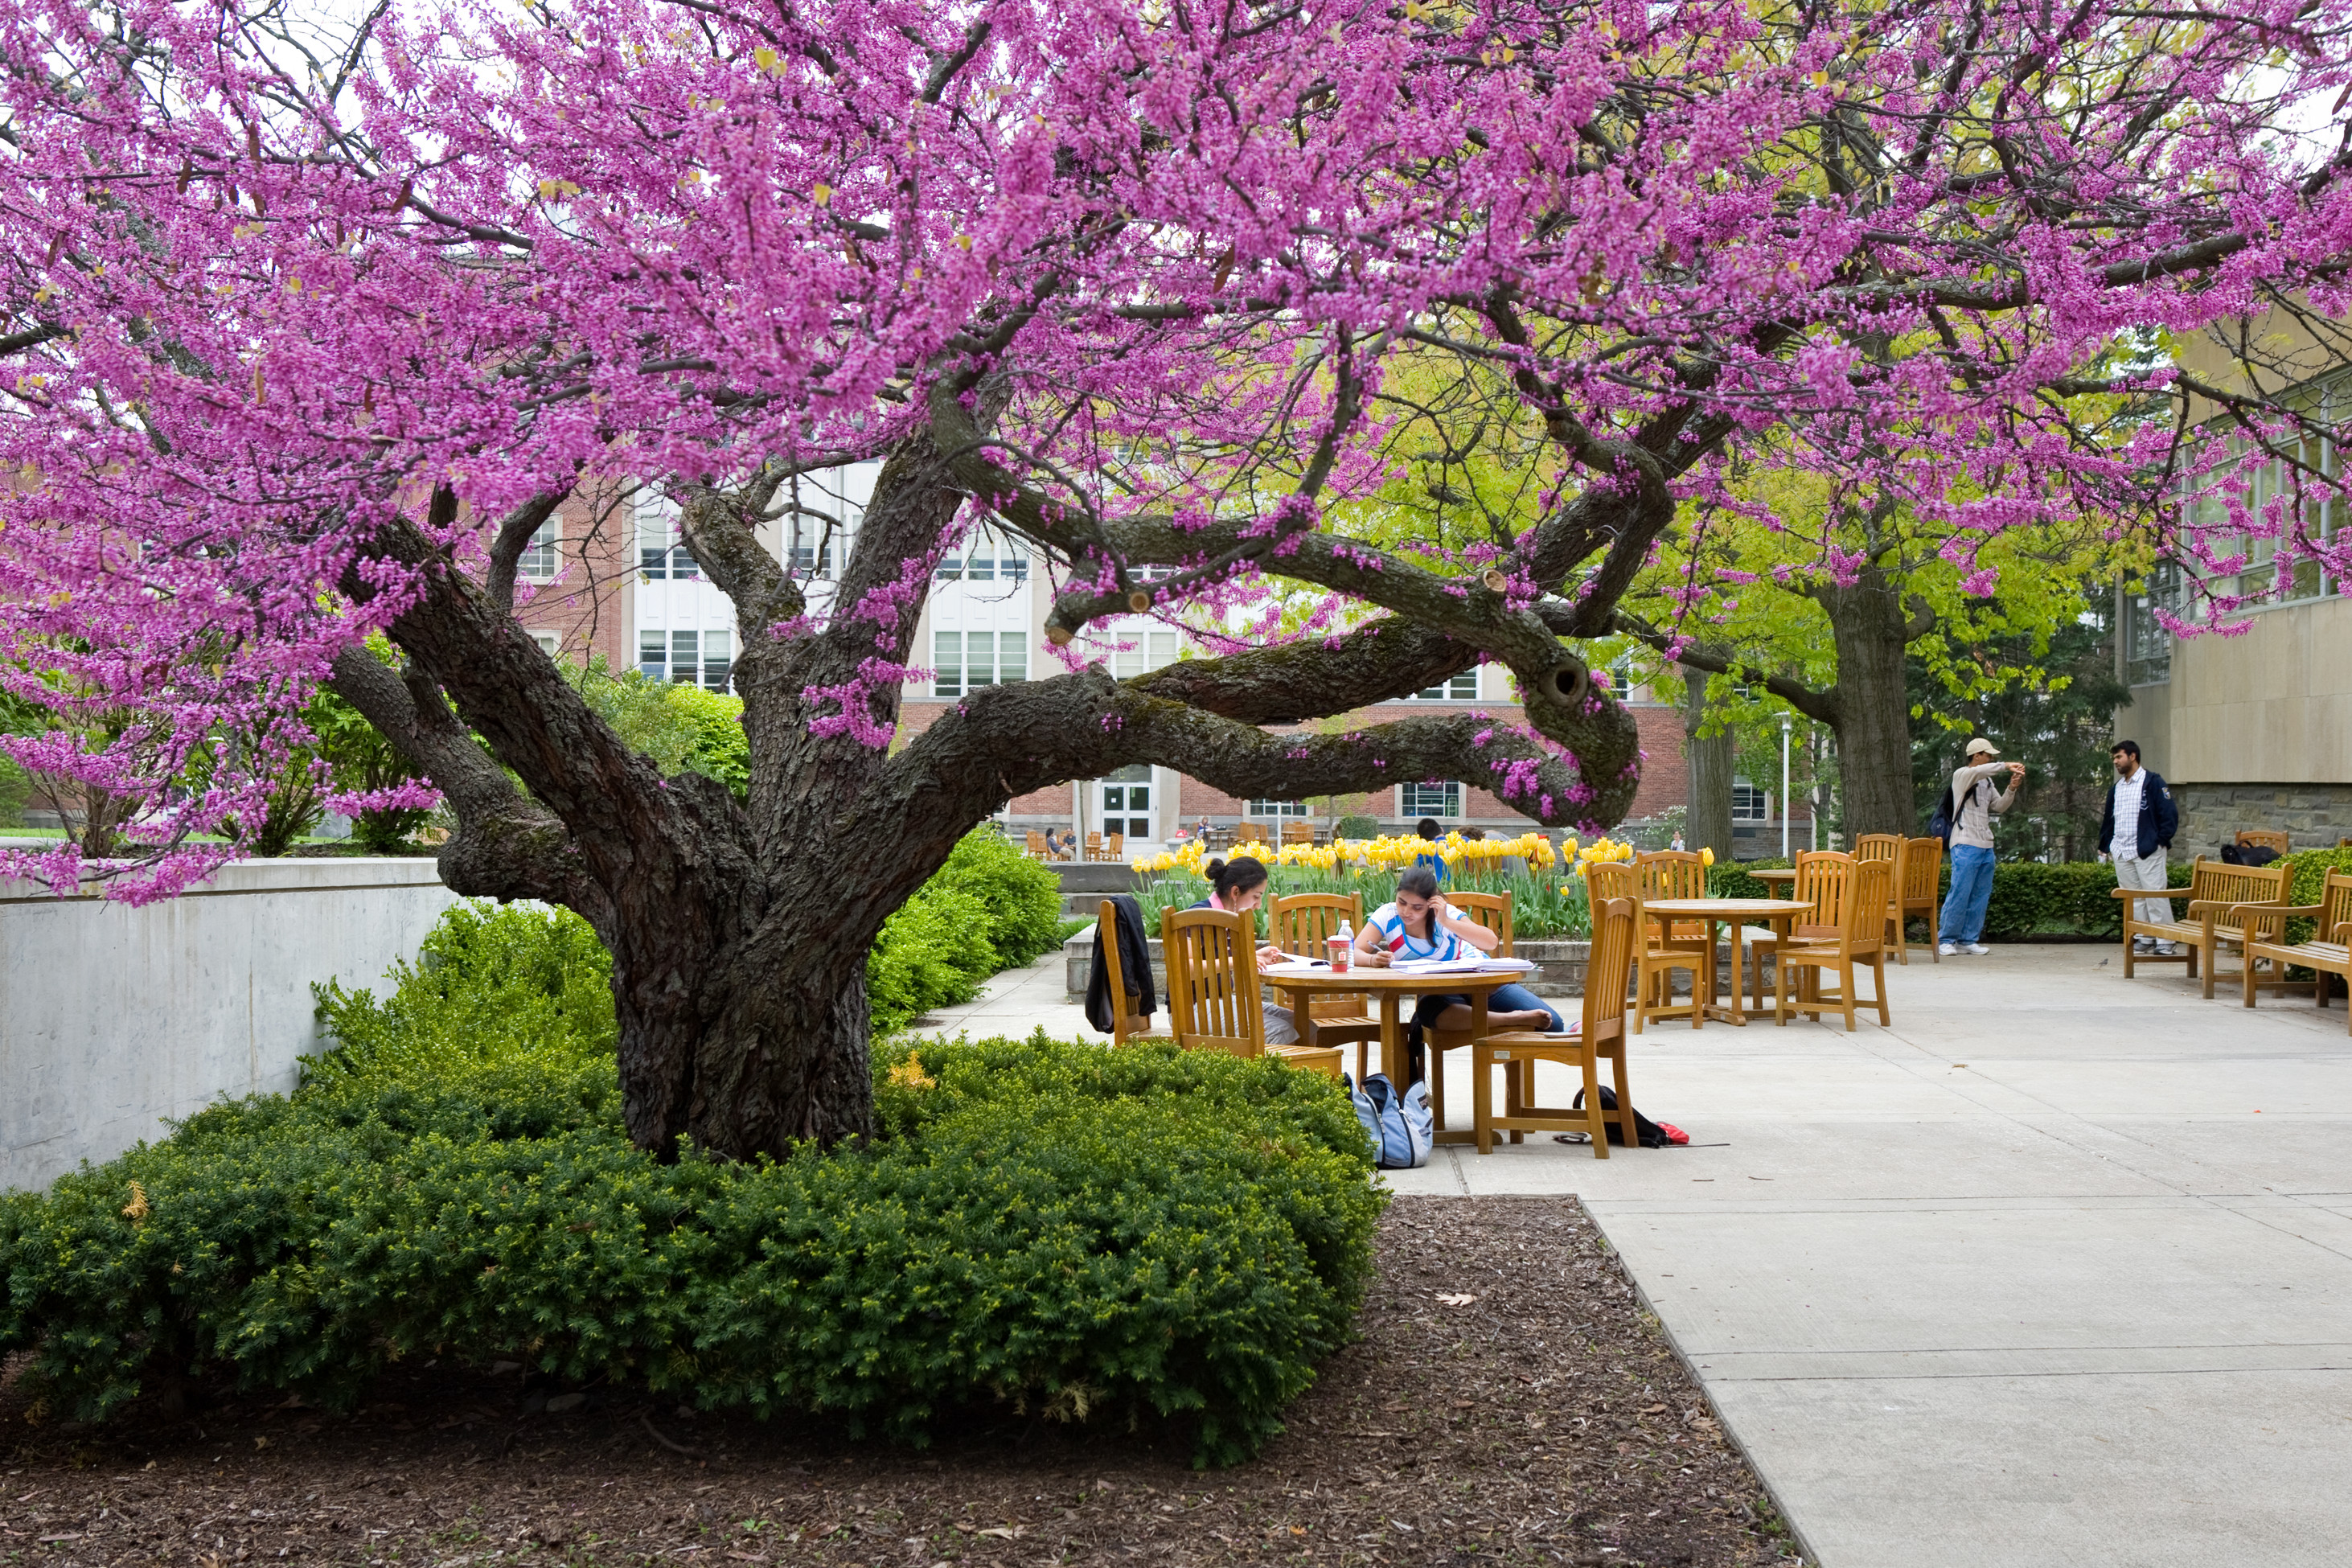 Outside Carpenter Hall in the Spring